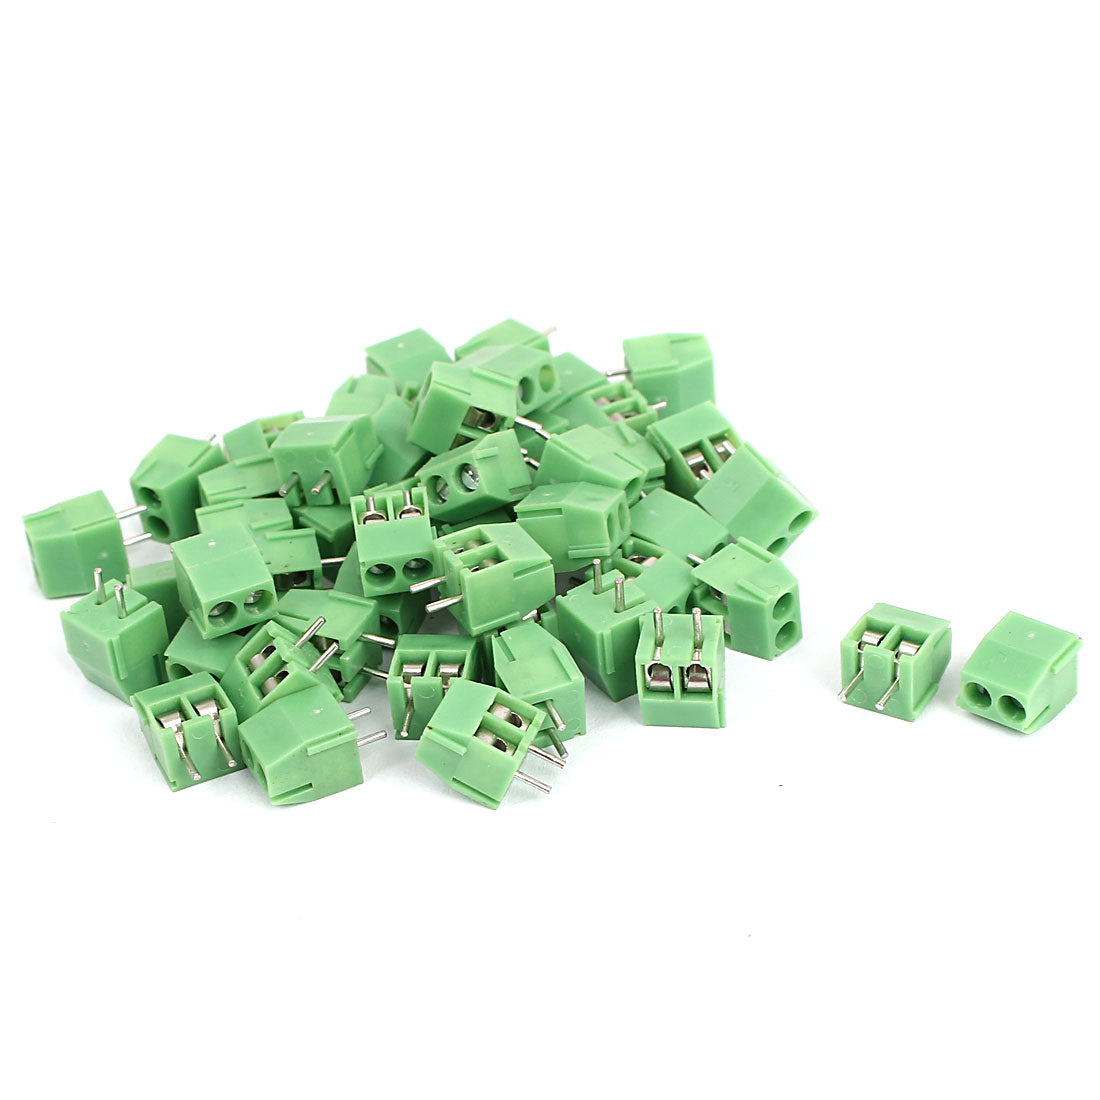 uxcell Uxcell 50 Pcs 2 Pin Screw Terminal Block Connector 3.5mm Pitch Panel PCB Mount Green